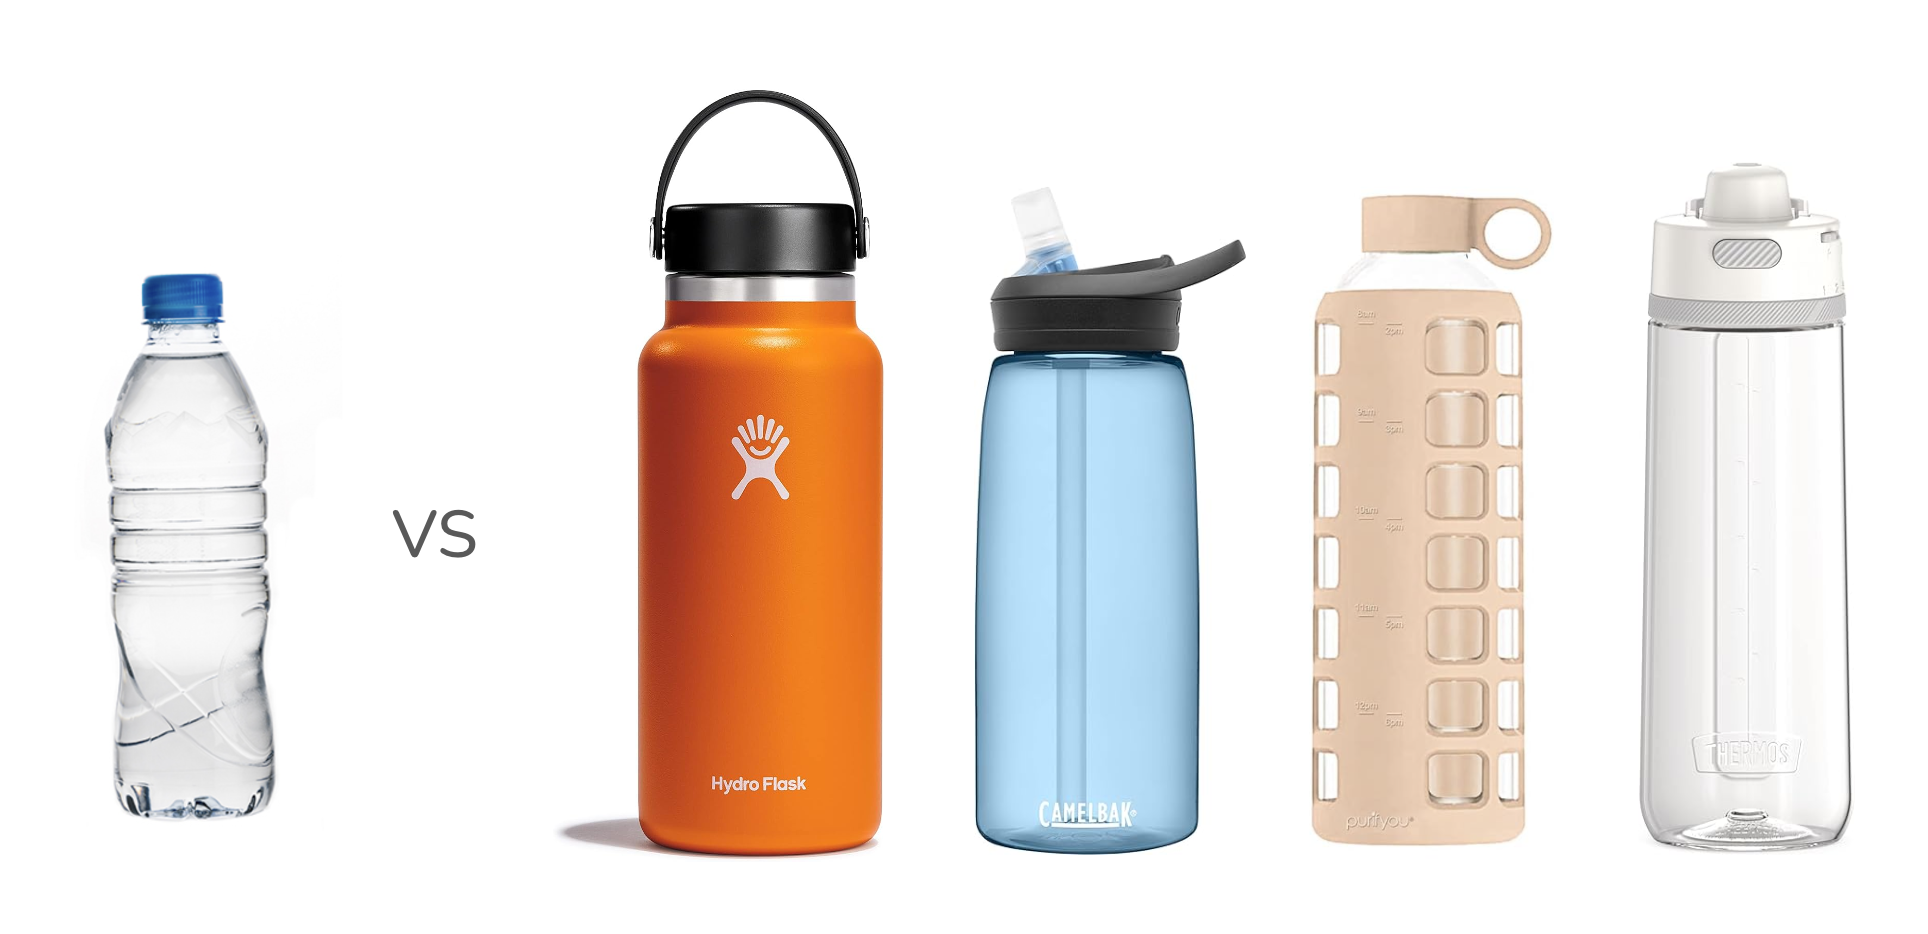 Reusable Water Bottles Are Not as Green as You Think